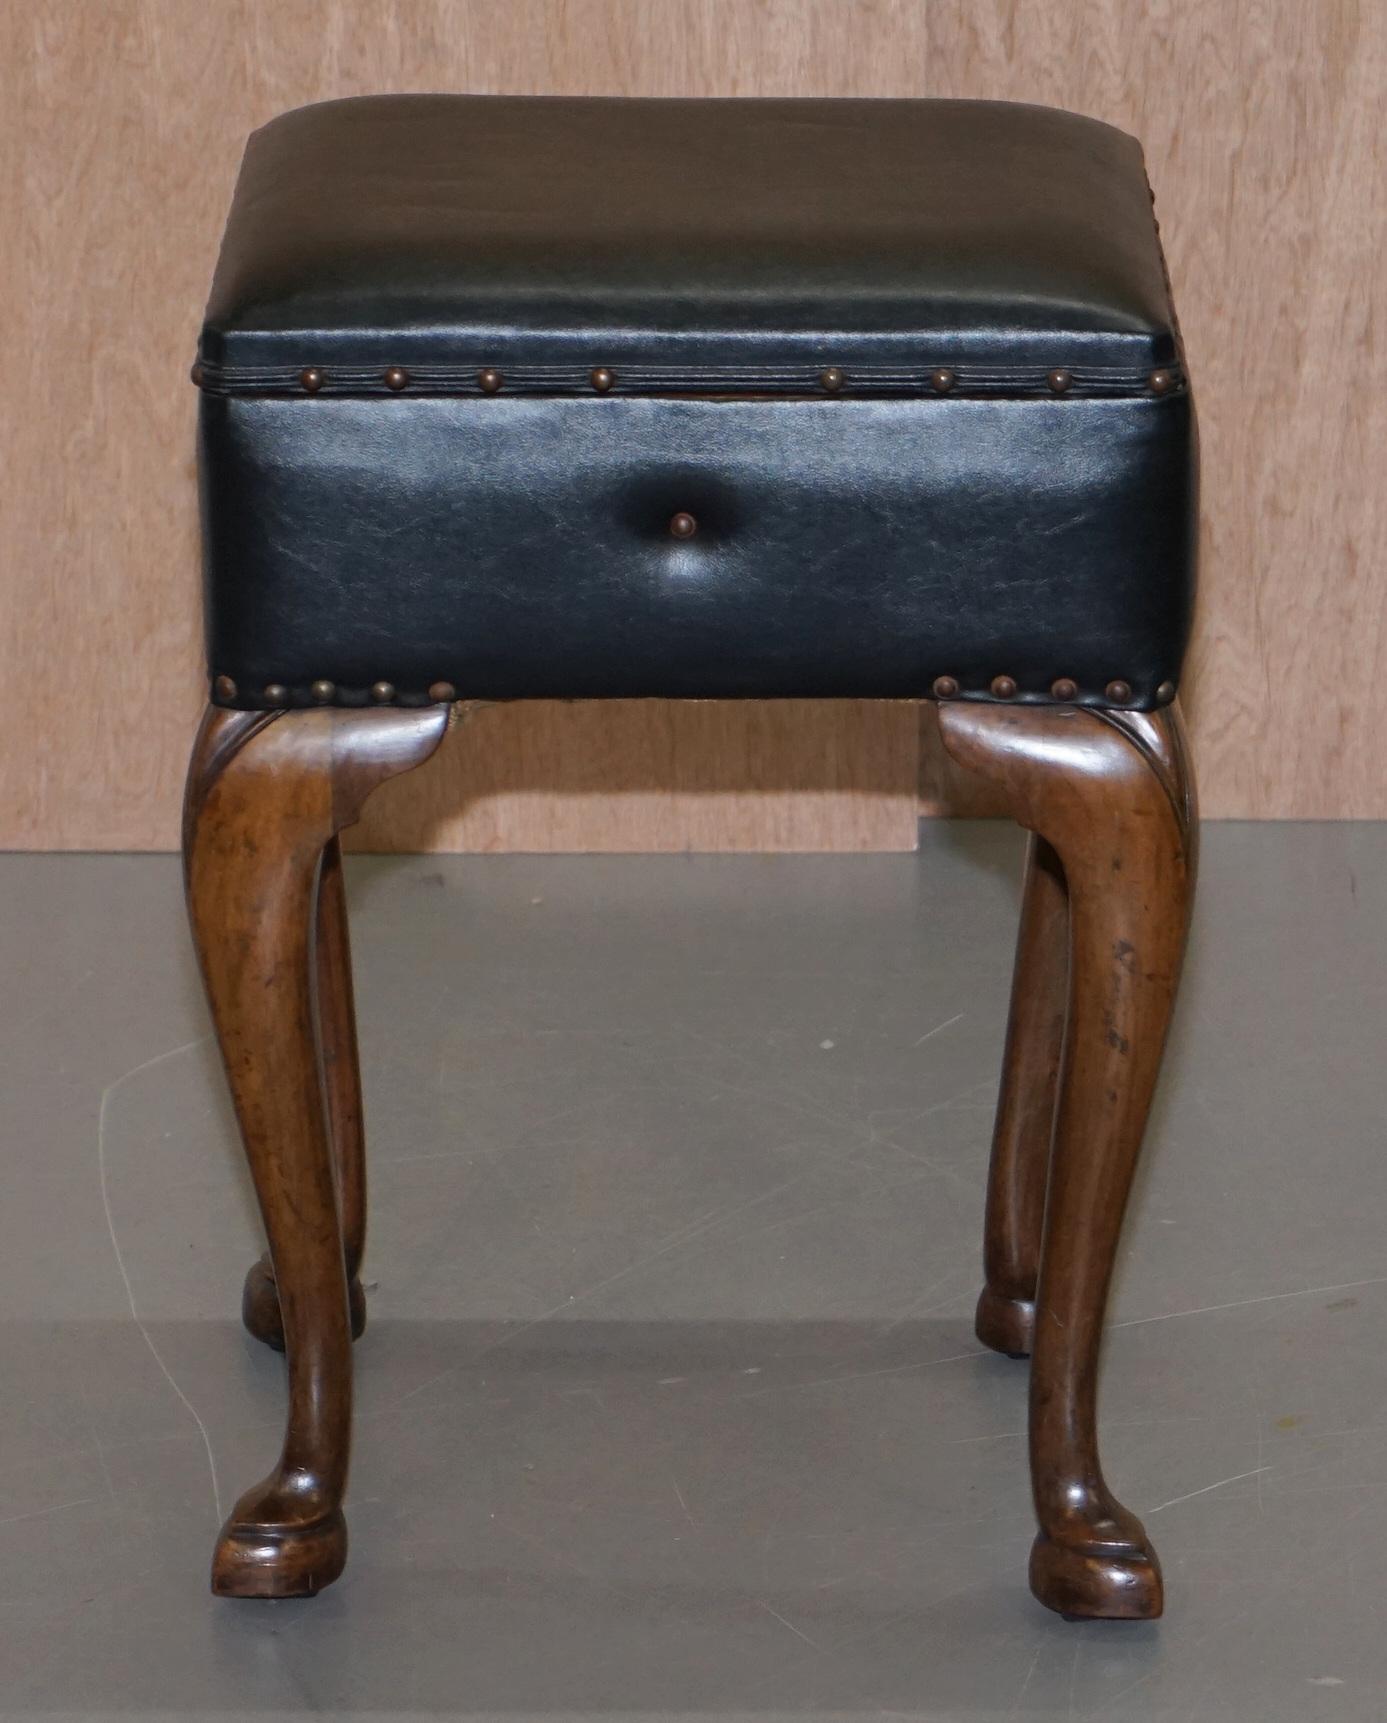 We are delighted to offer for sale this Victorian French walnut circa 1880 Piano stool with internal music sheet storage 

A good looking well made and function piece of Victorian furniture, the timber patina is exquisite and the legs are subtlety